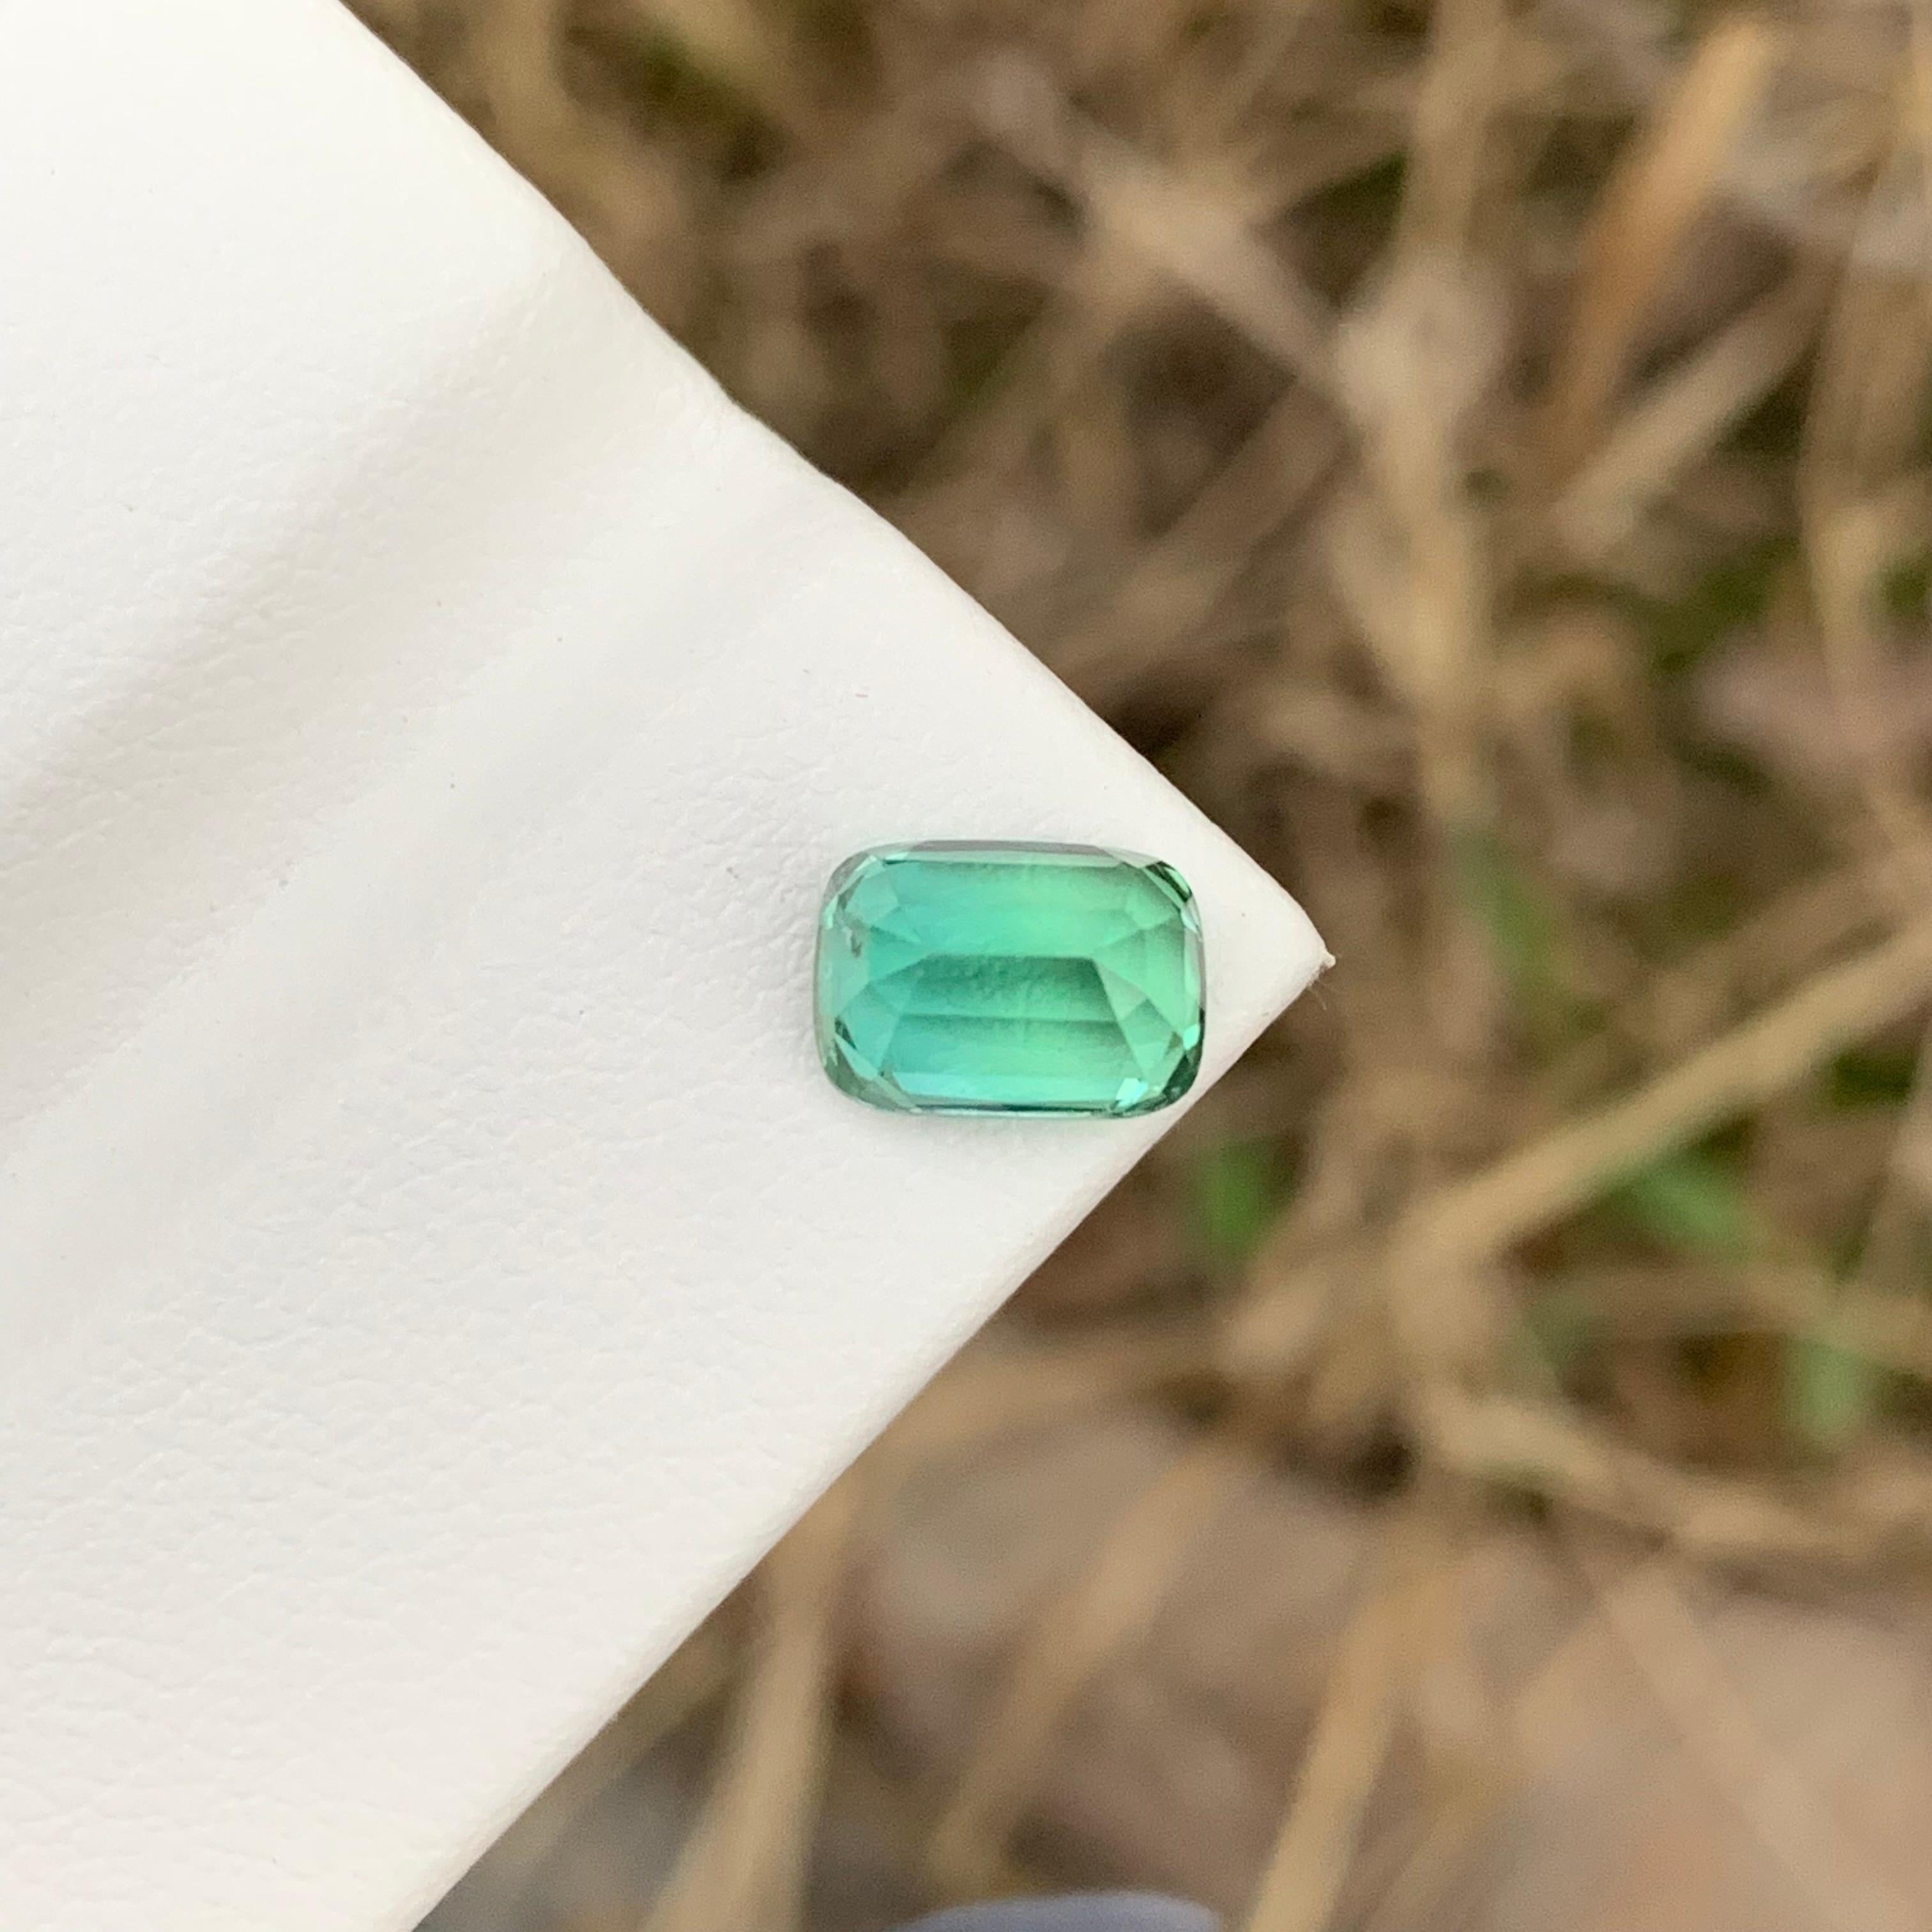 Loose Tourmaline
Weight: 1.85 Carats 
Dimension: 7.9x5.6x5.1 Mm
Origin: Kunar Afghanistan 
Shape: Long Cushion 
Color: Greenish Blue
Treatment: Non
Certificate: On Demand 
Tourmaline, a mesmerizing gemstone, comes in a spectrum of colors, making it